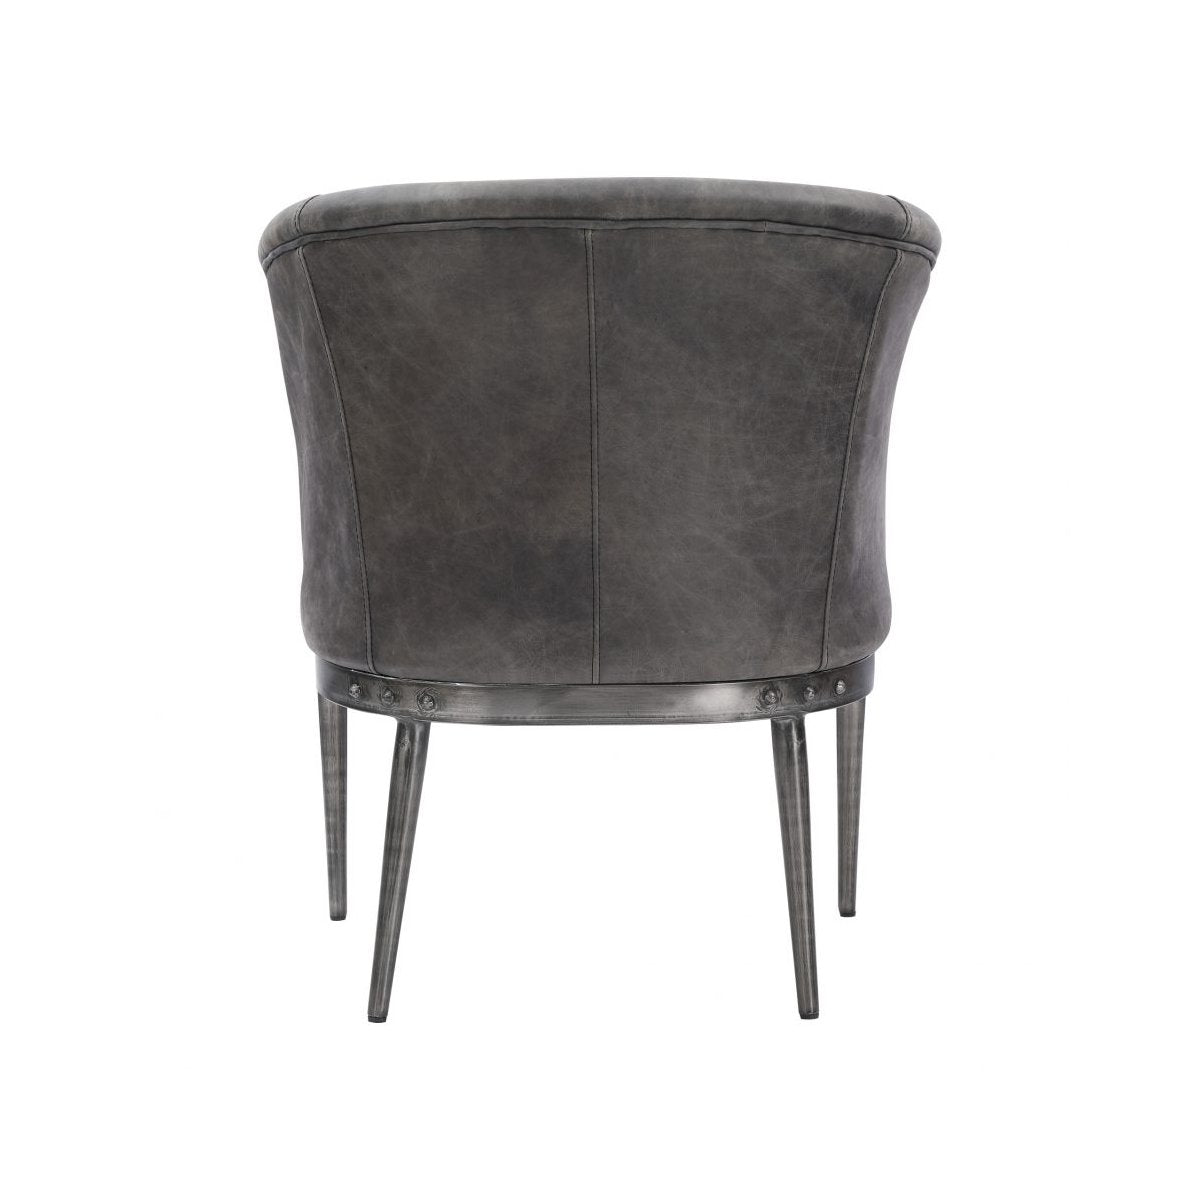 Load image into Gallery viewer, Luther Accent Chair Occasional Chairs Moe&amp;#39;s     Four Hands, Burke Decor, Mid Century Modern Furniture, Old Bones Furniture Company, Old Bones Co, Modern Mid Century, Designer Furniture, https://www.oldbonesco.com/
